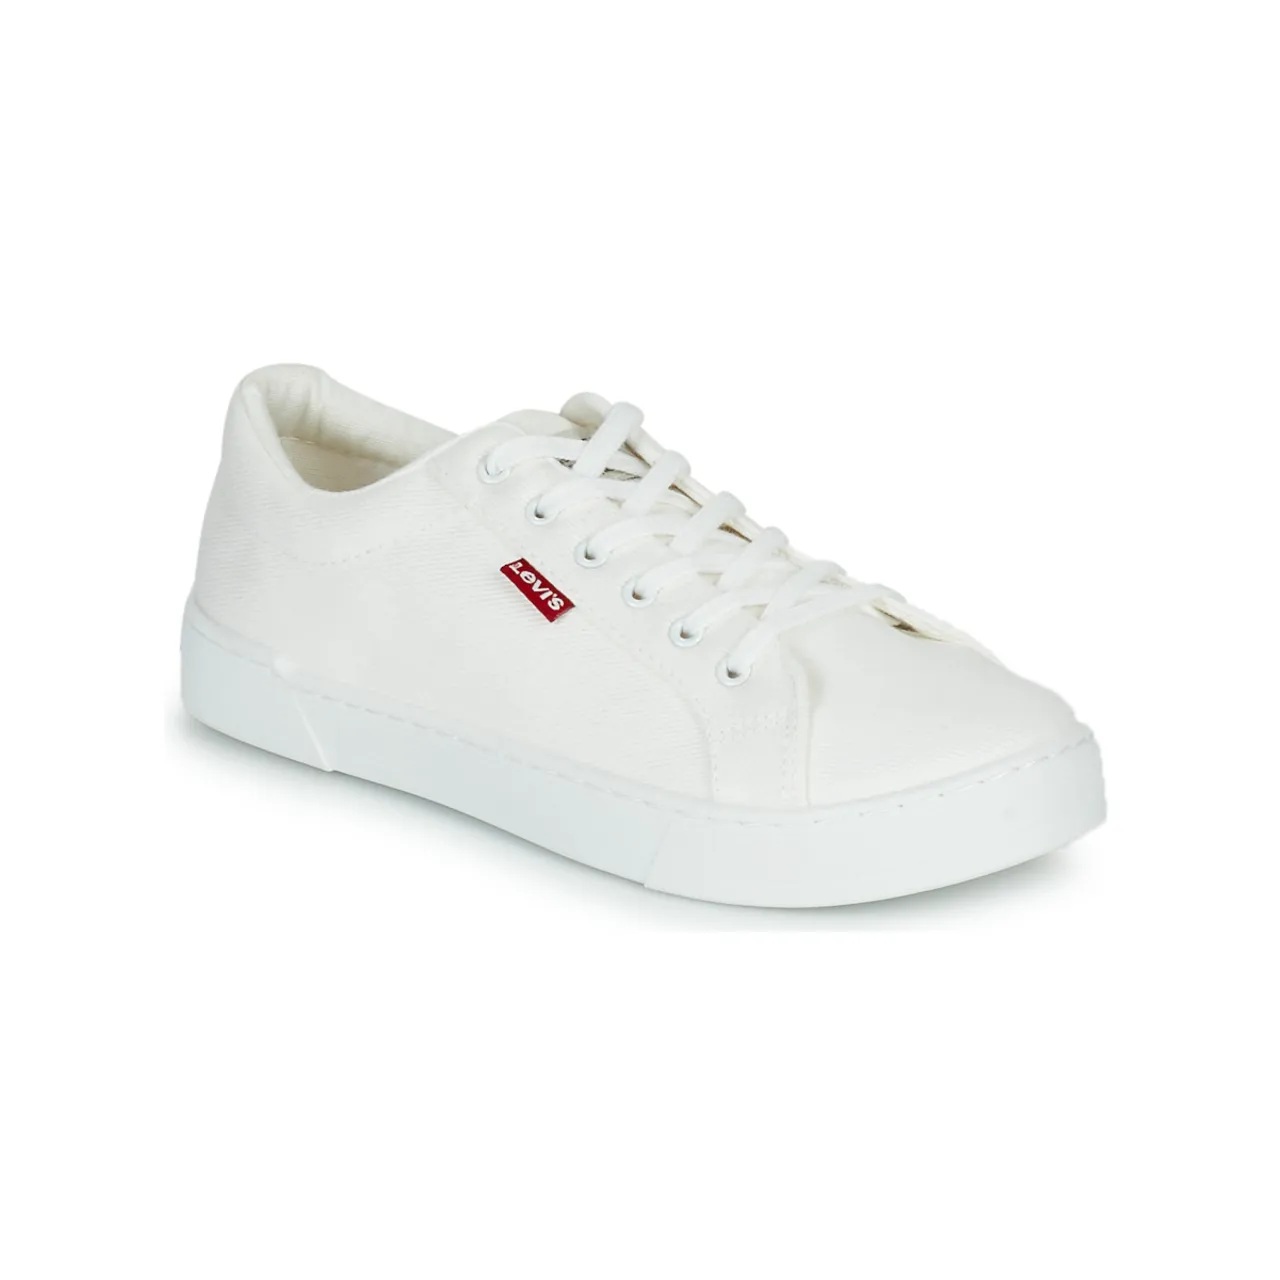 Levis  MALIBU 2.0  women's Shoes (Trainers) in White